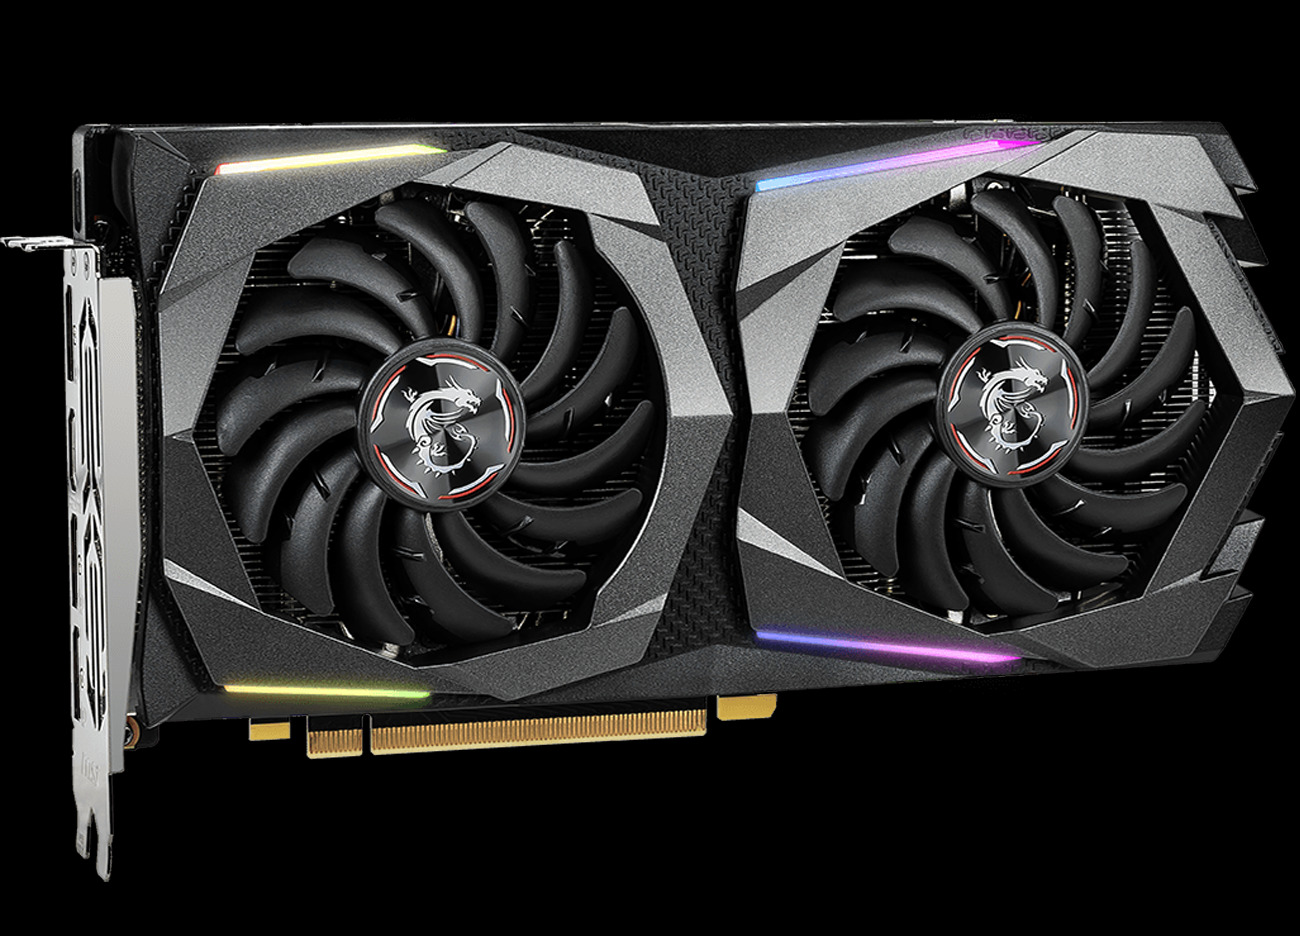 MSI GeForce GTX 1660 SUPER GAMING X Review - Page 2 of 13 - The 